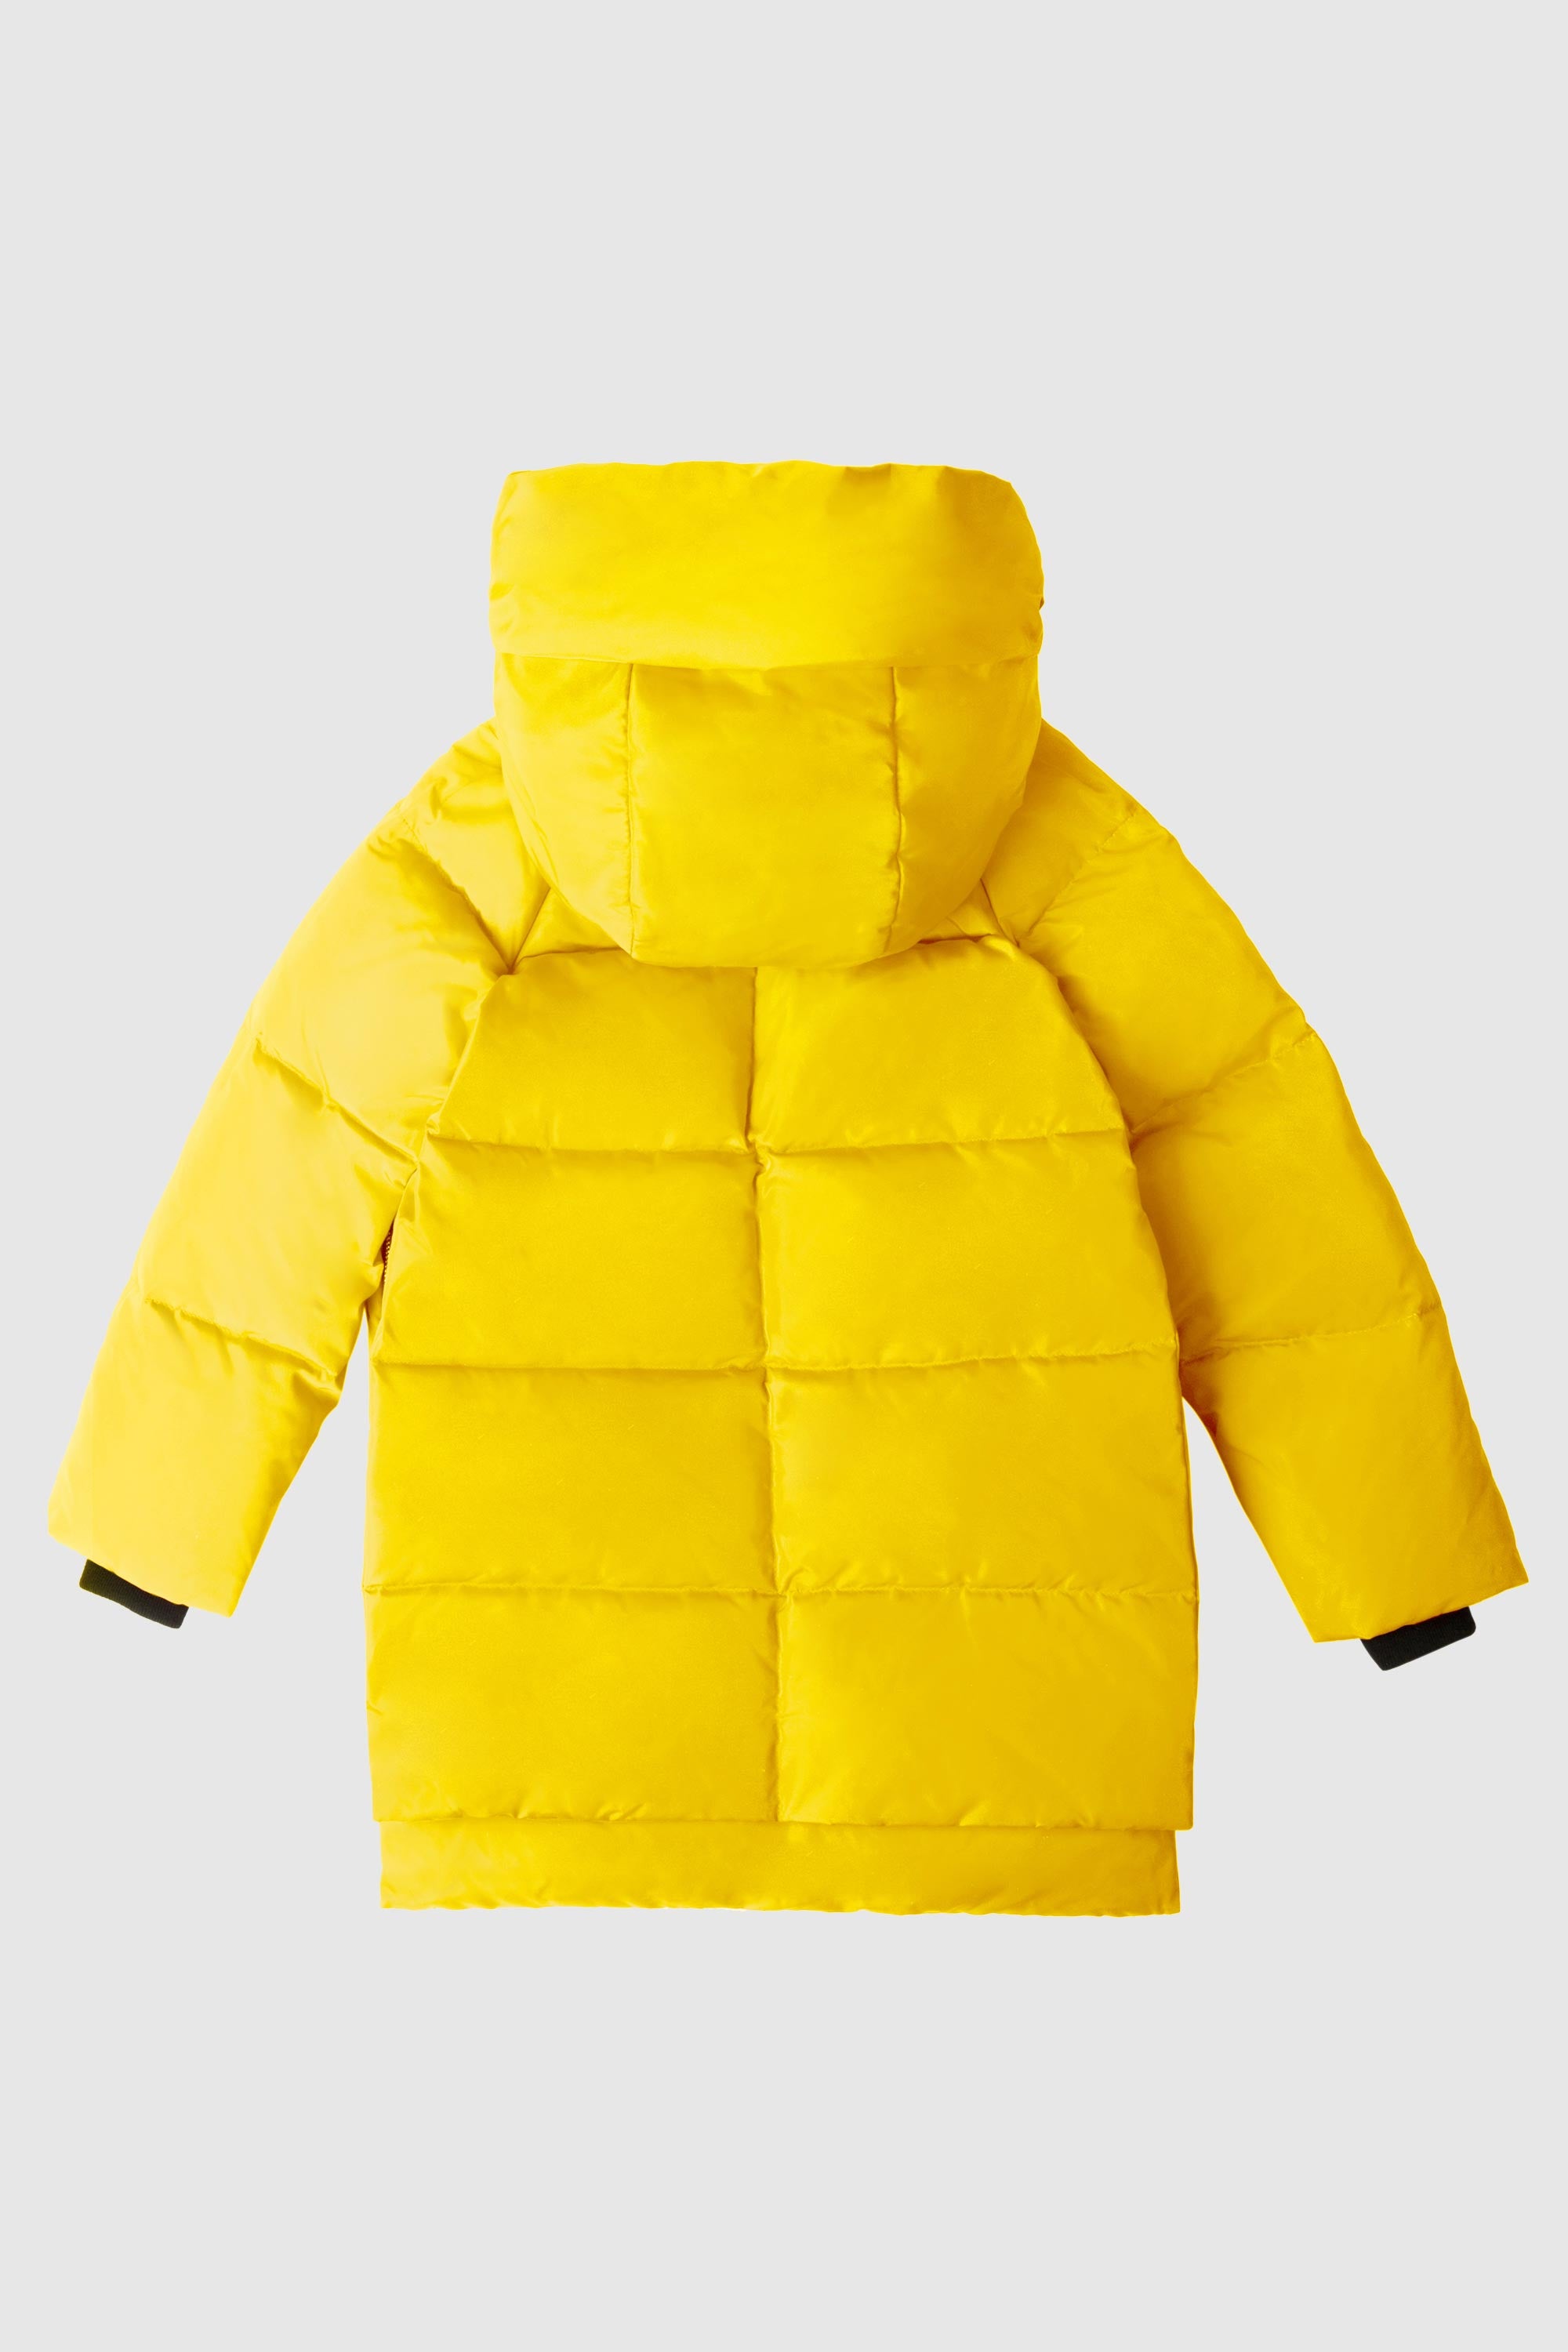 092 Universe Classics Children Thickened Hooded Down Coat